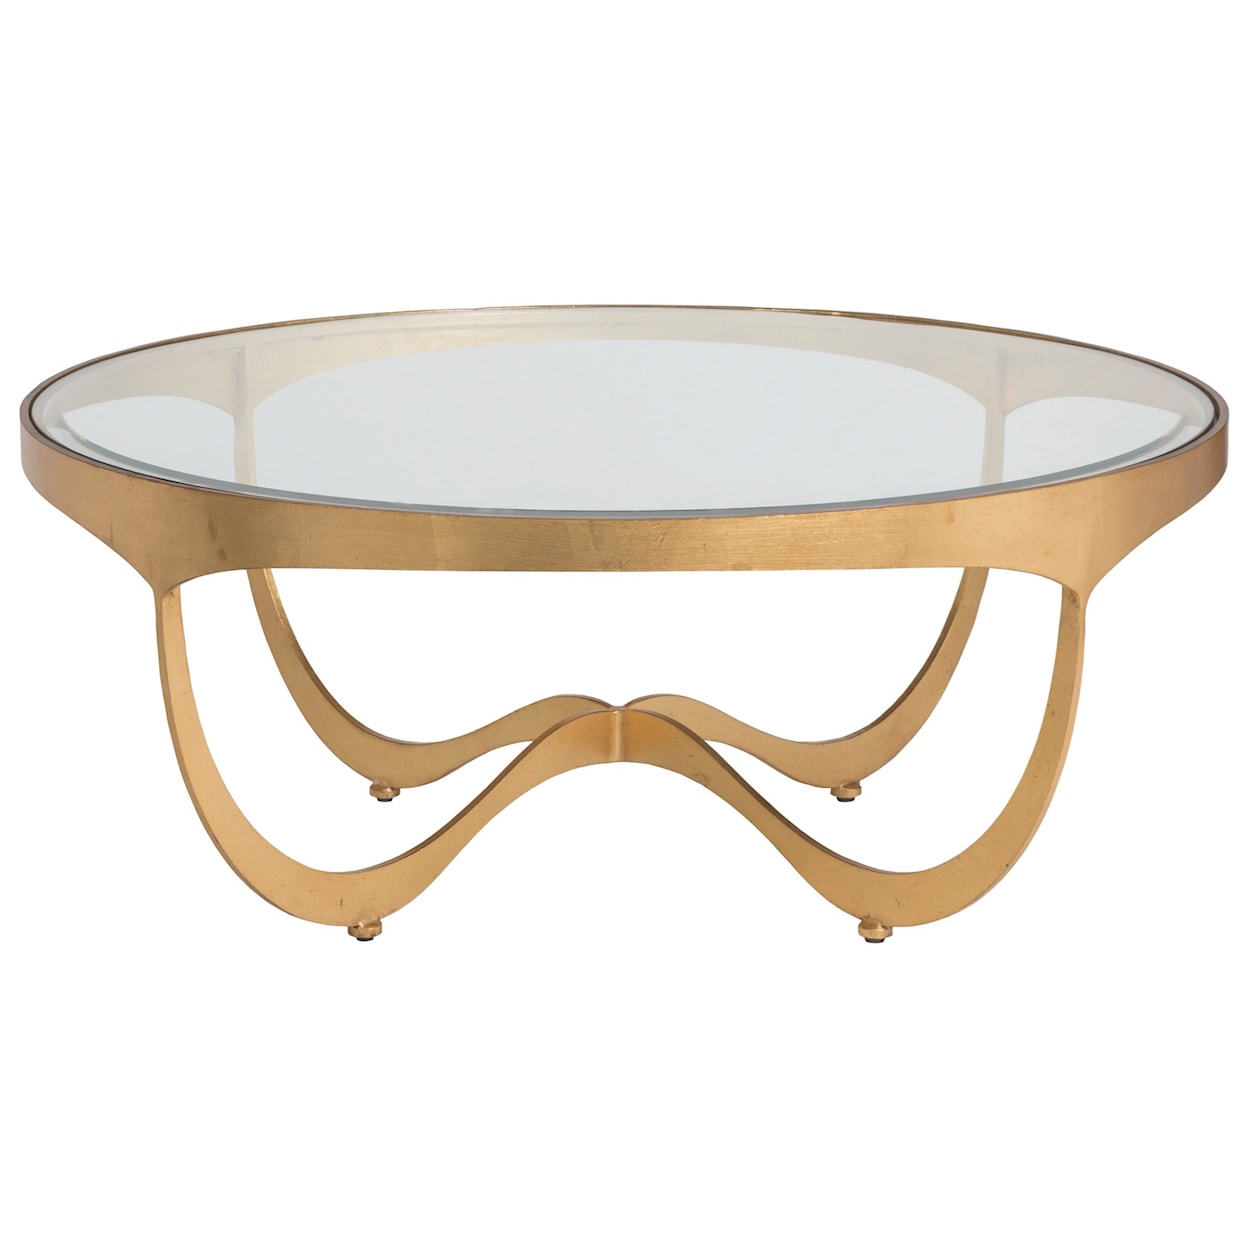 Artistica Artistica Metal Sophie Round Cocktail Table